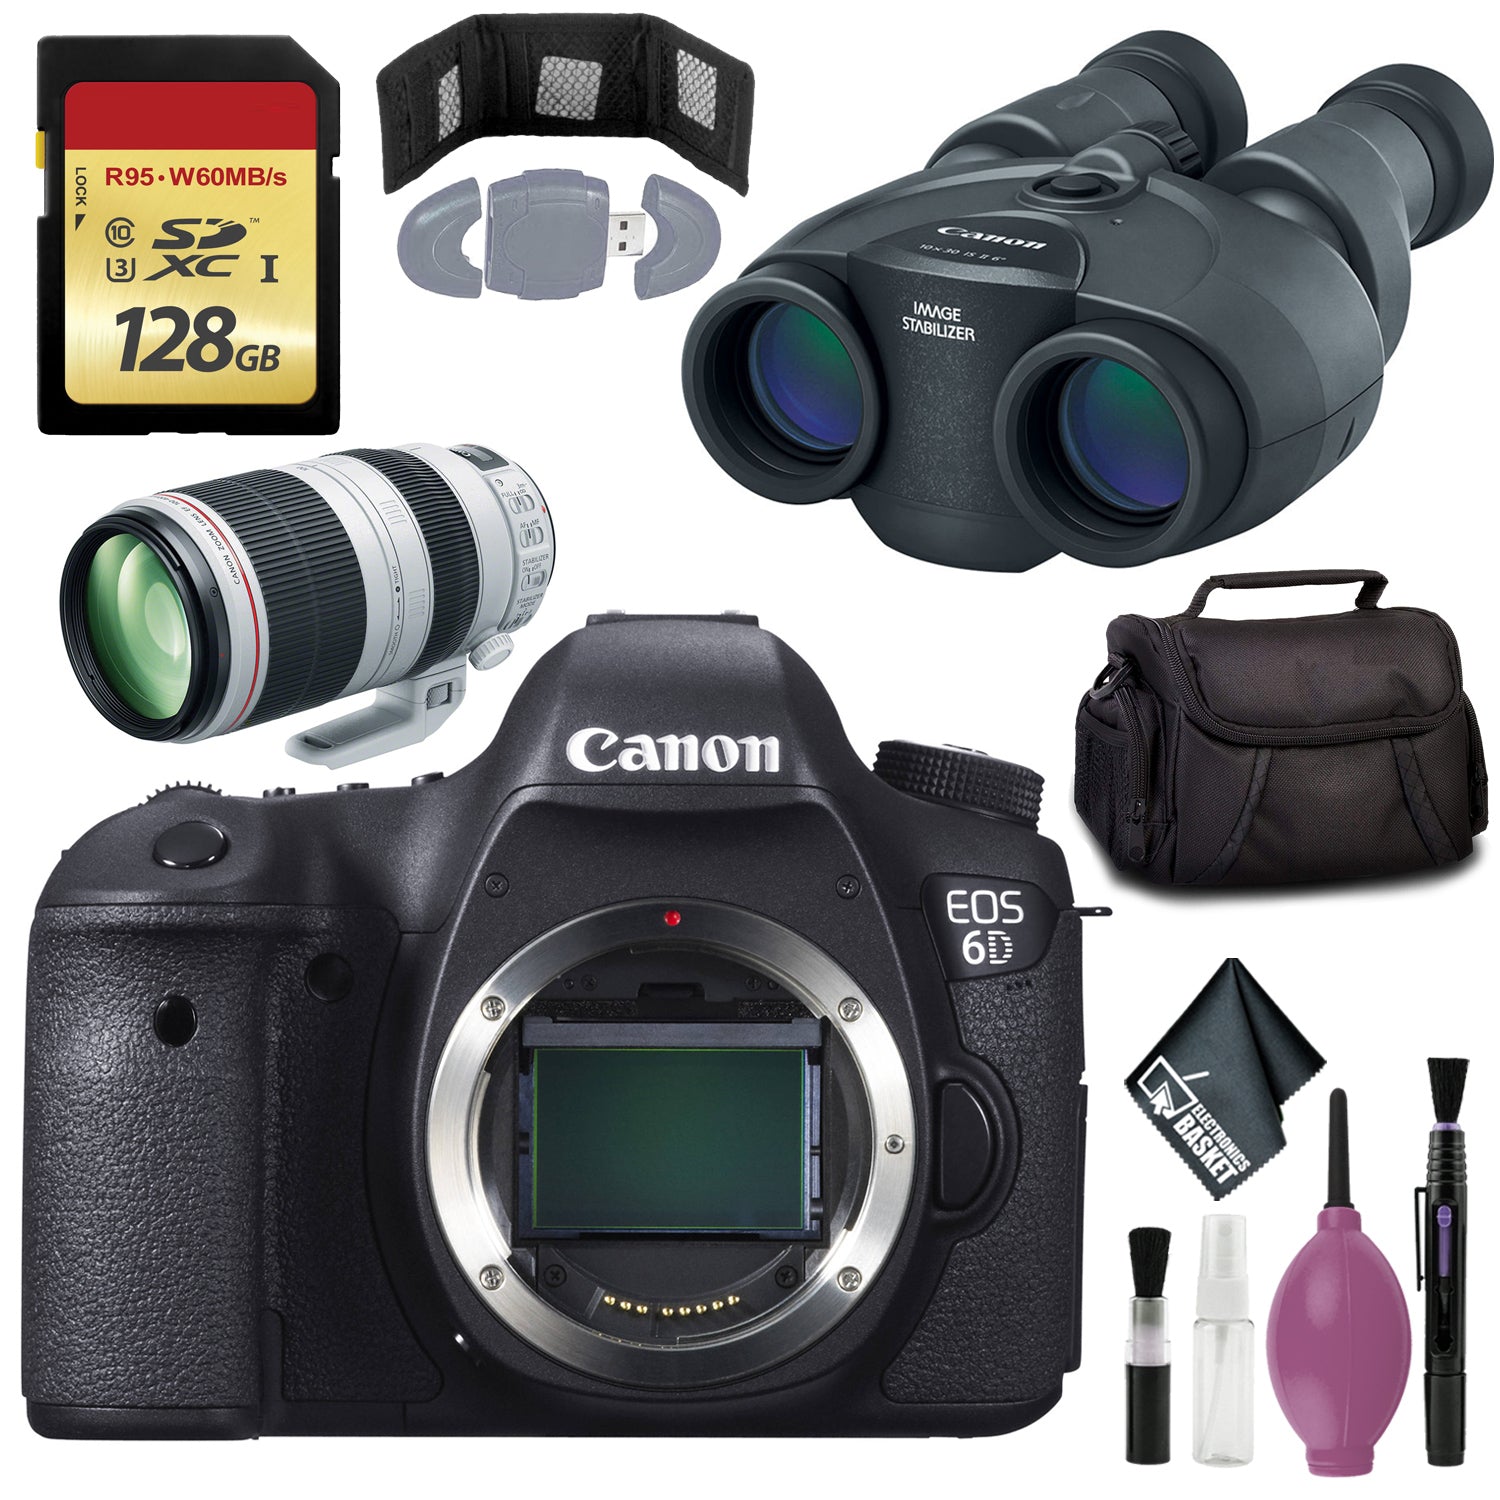 Canon 10x30 IS II Image Stabilized Binocular - CANON EOS 6D PRO DIG CAMERA - 128GB Card - Card Wallet - Reader